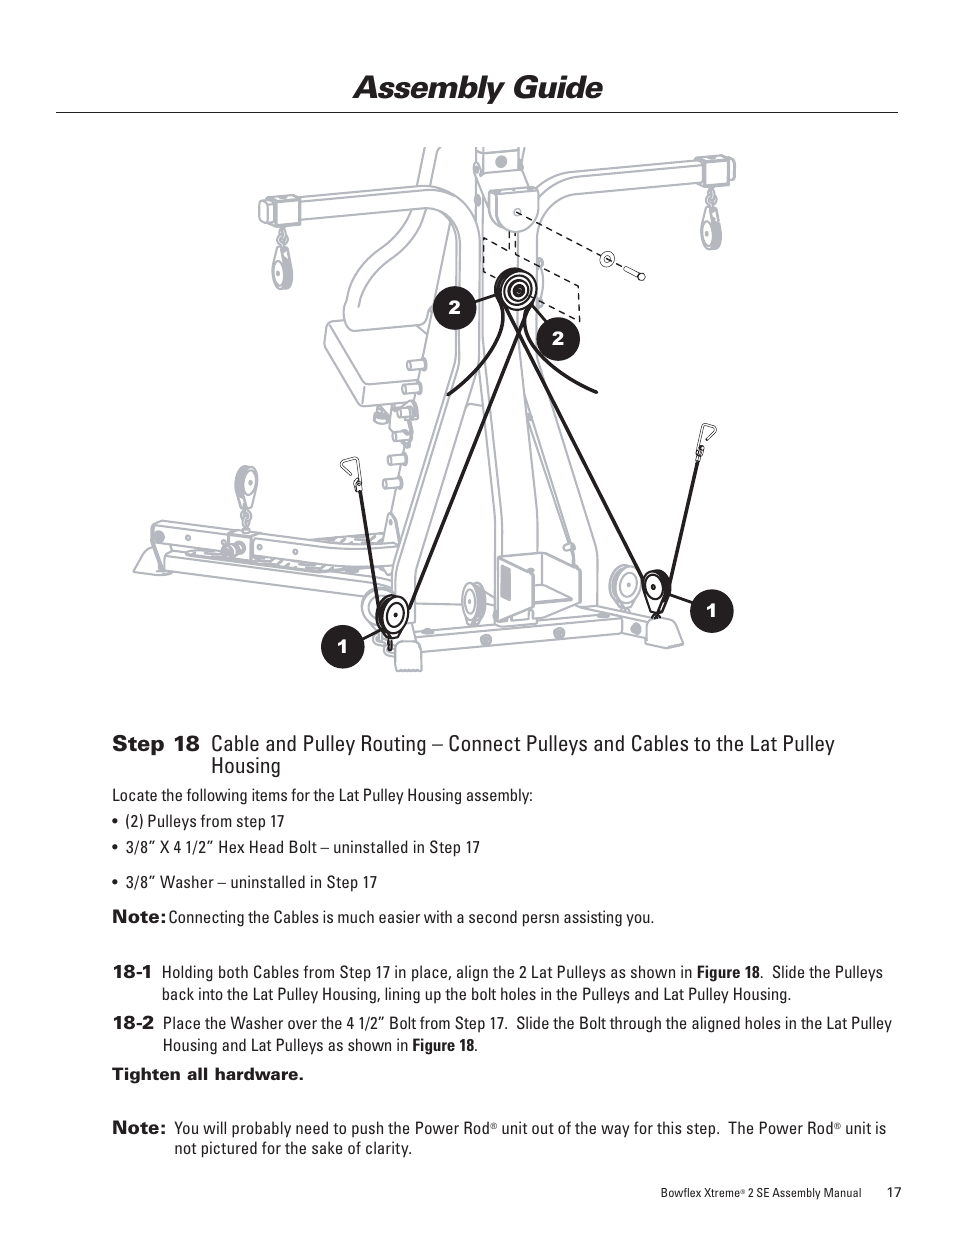 Assembly guide | Bowflex Xtreme 2 SE User Manual | Page 21 / 28